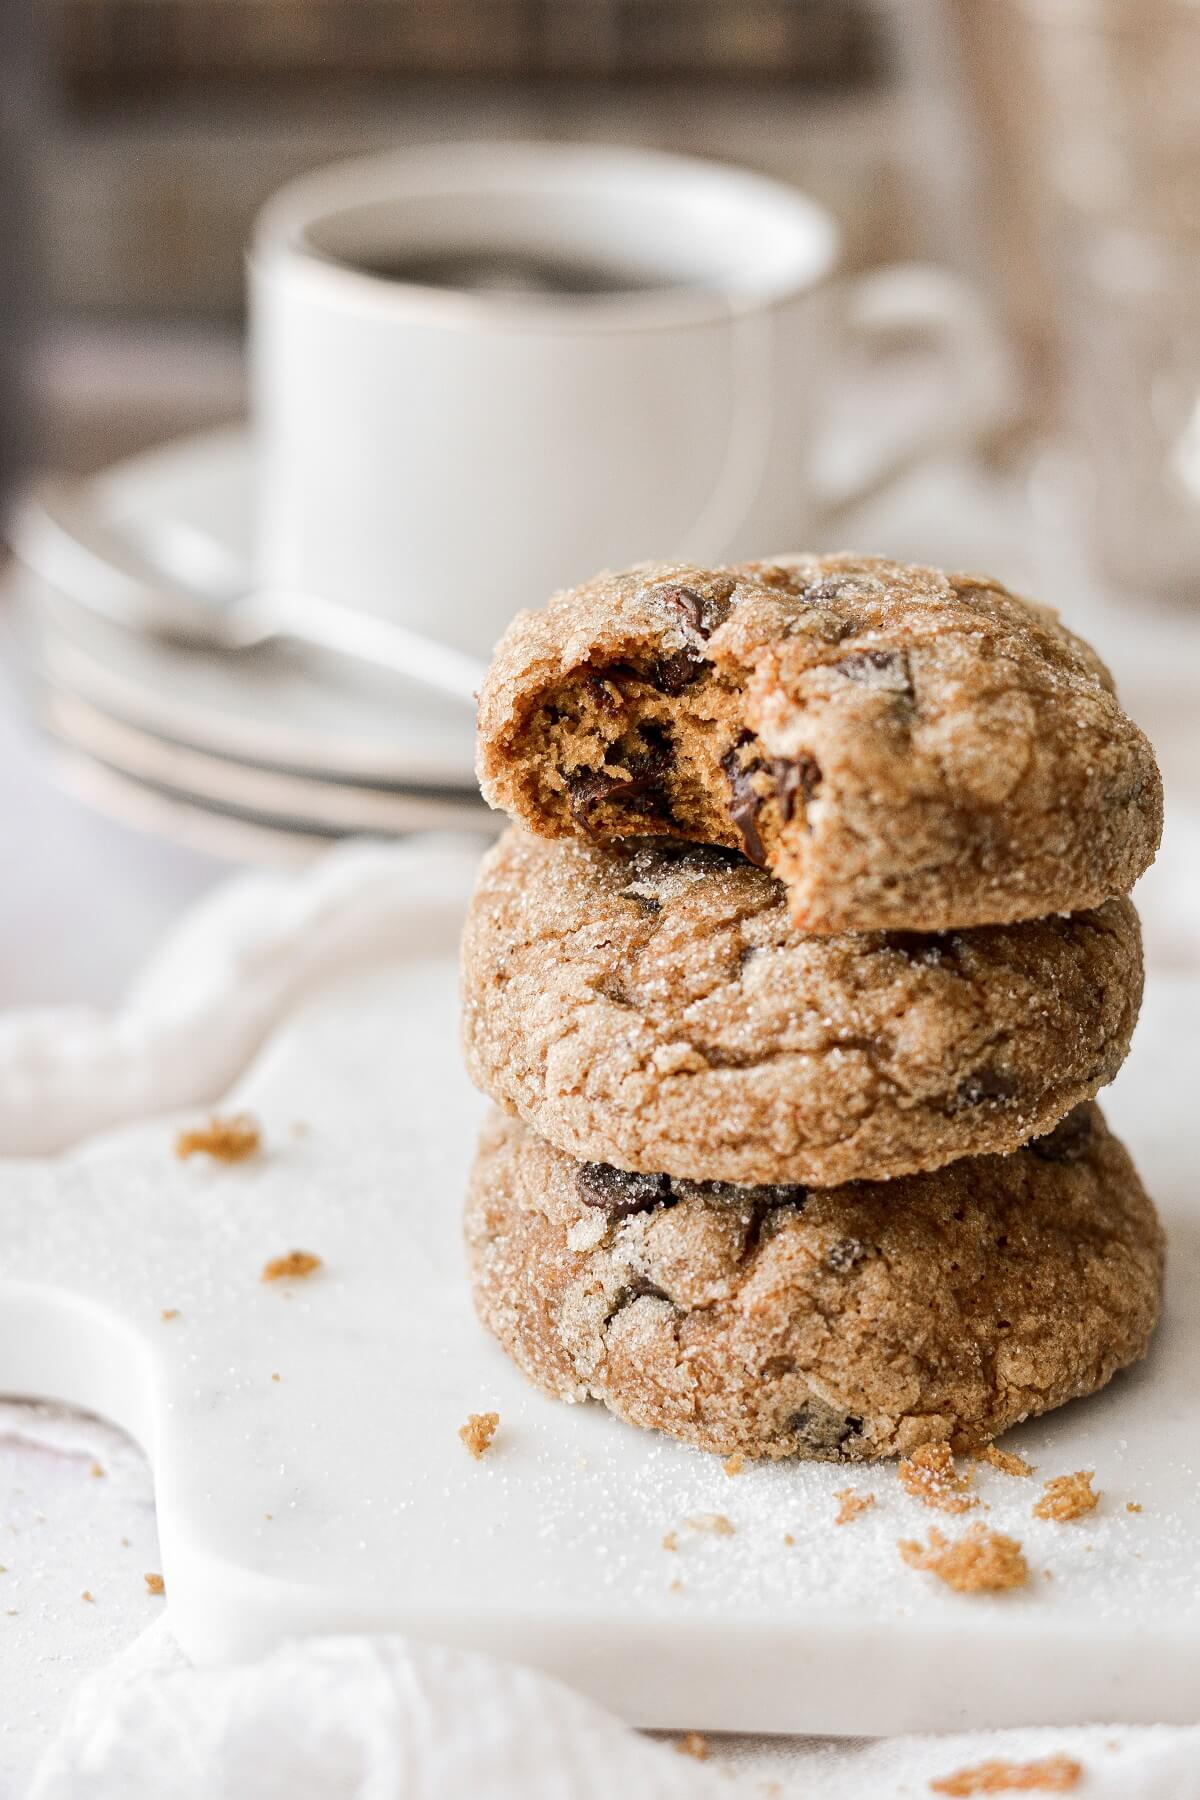 A stack of pumpkin chocolate chip cookies, one with a bite taken.